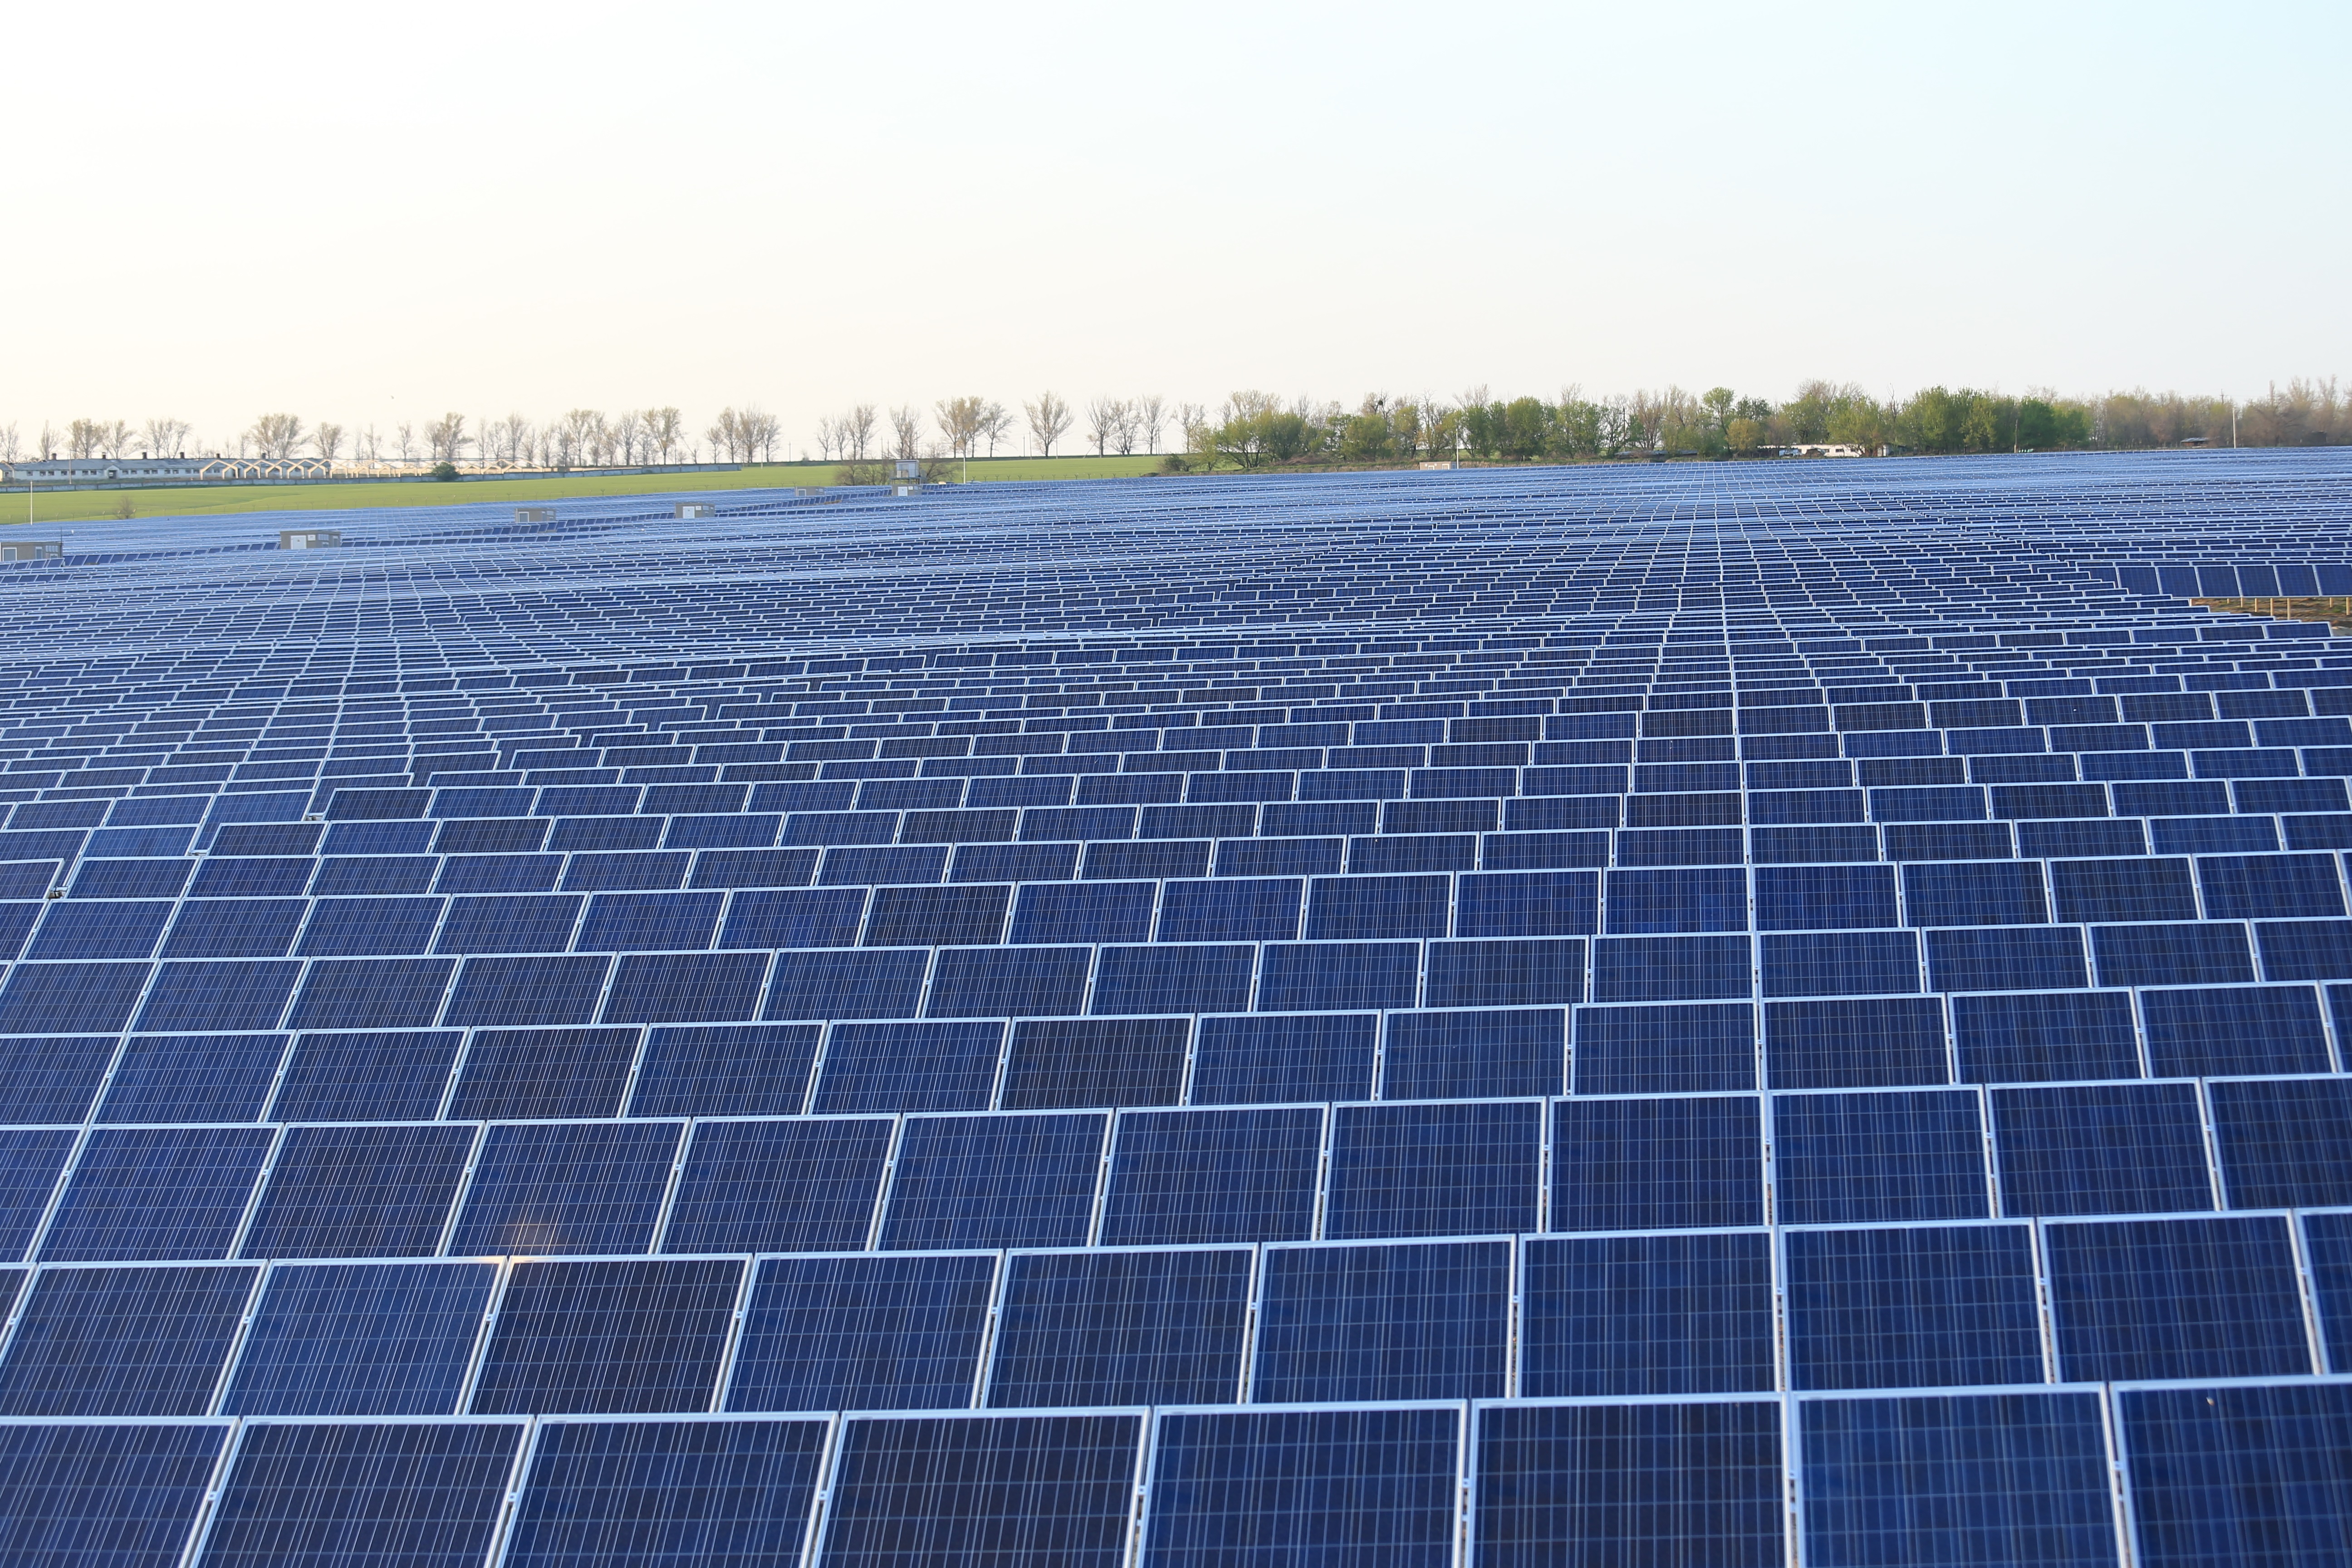 4.4MW Solar Farm Shines as Largest 2014 Managed Growth Project in Massachusetts